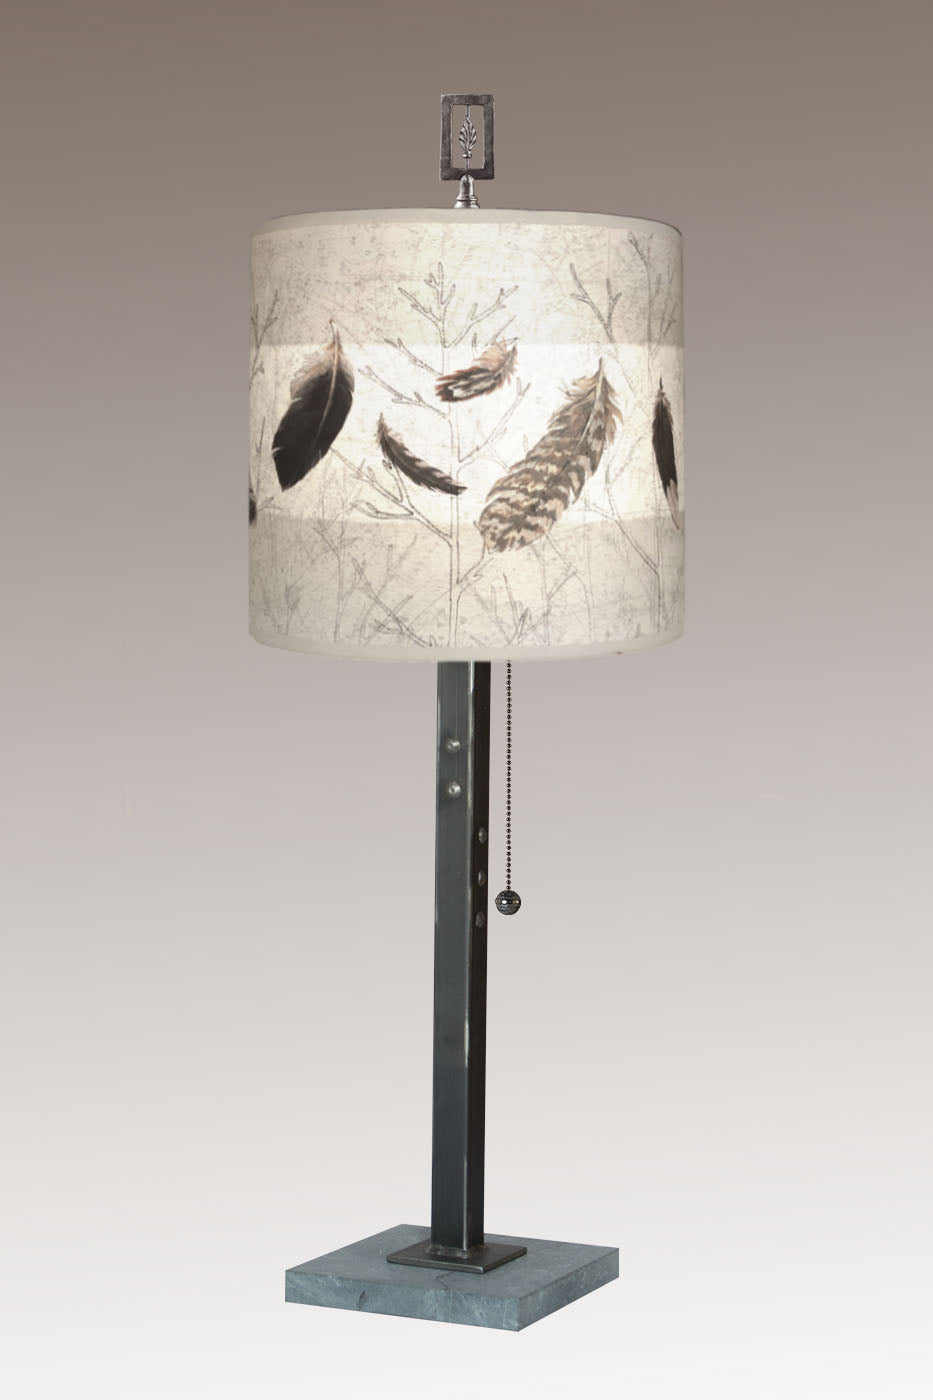 Steel Table Lamp with Medium Drum Shade in Feathers in Pebble